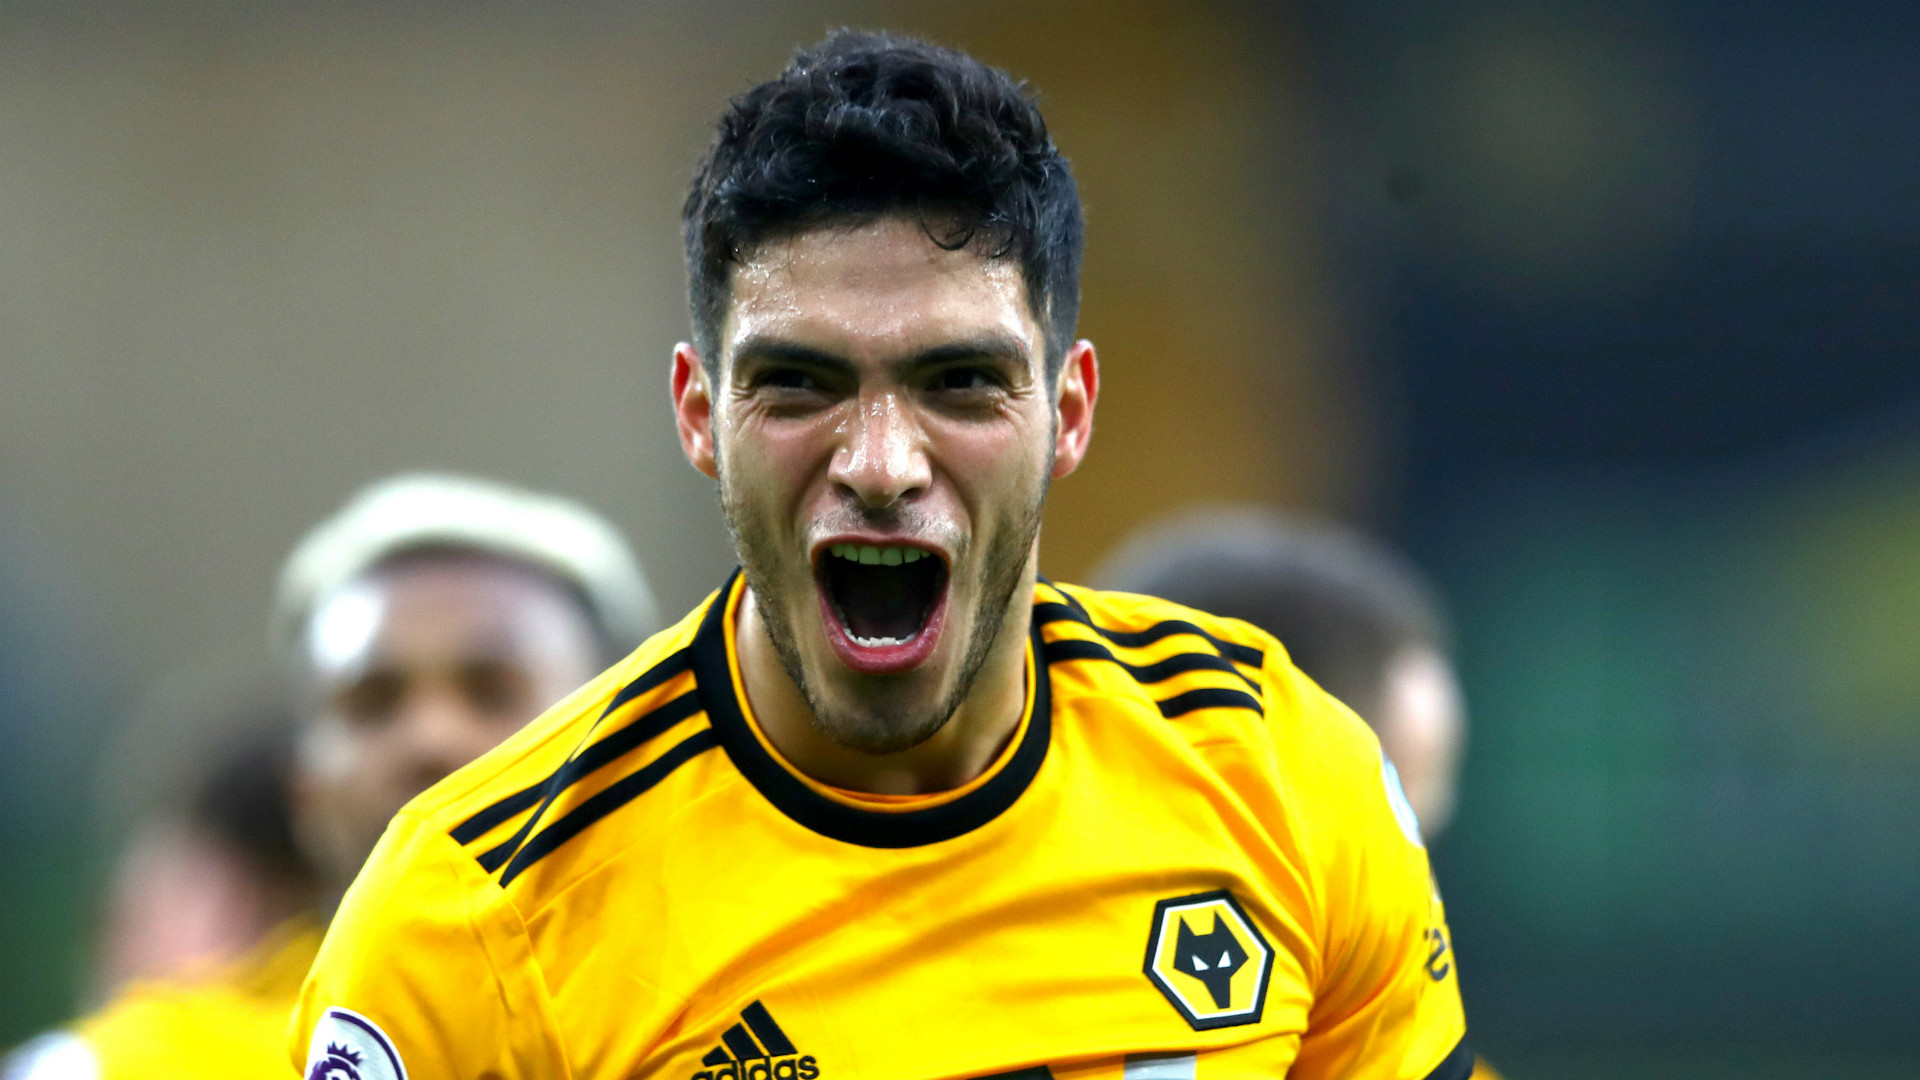 Man Utd tipped to sign Wolves ace Raul Jimenez but deal would only happen on one condition - Bóng Đá